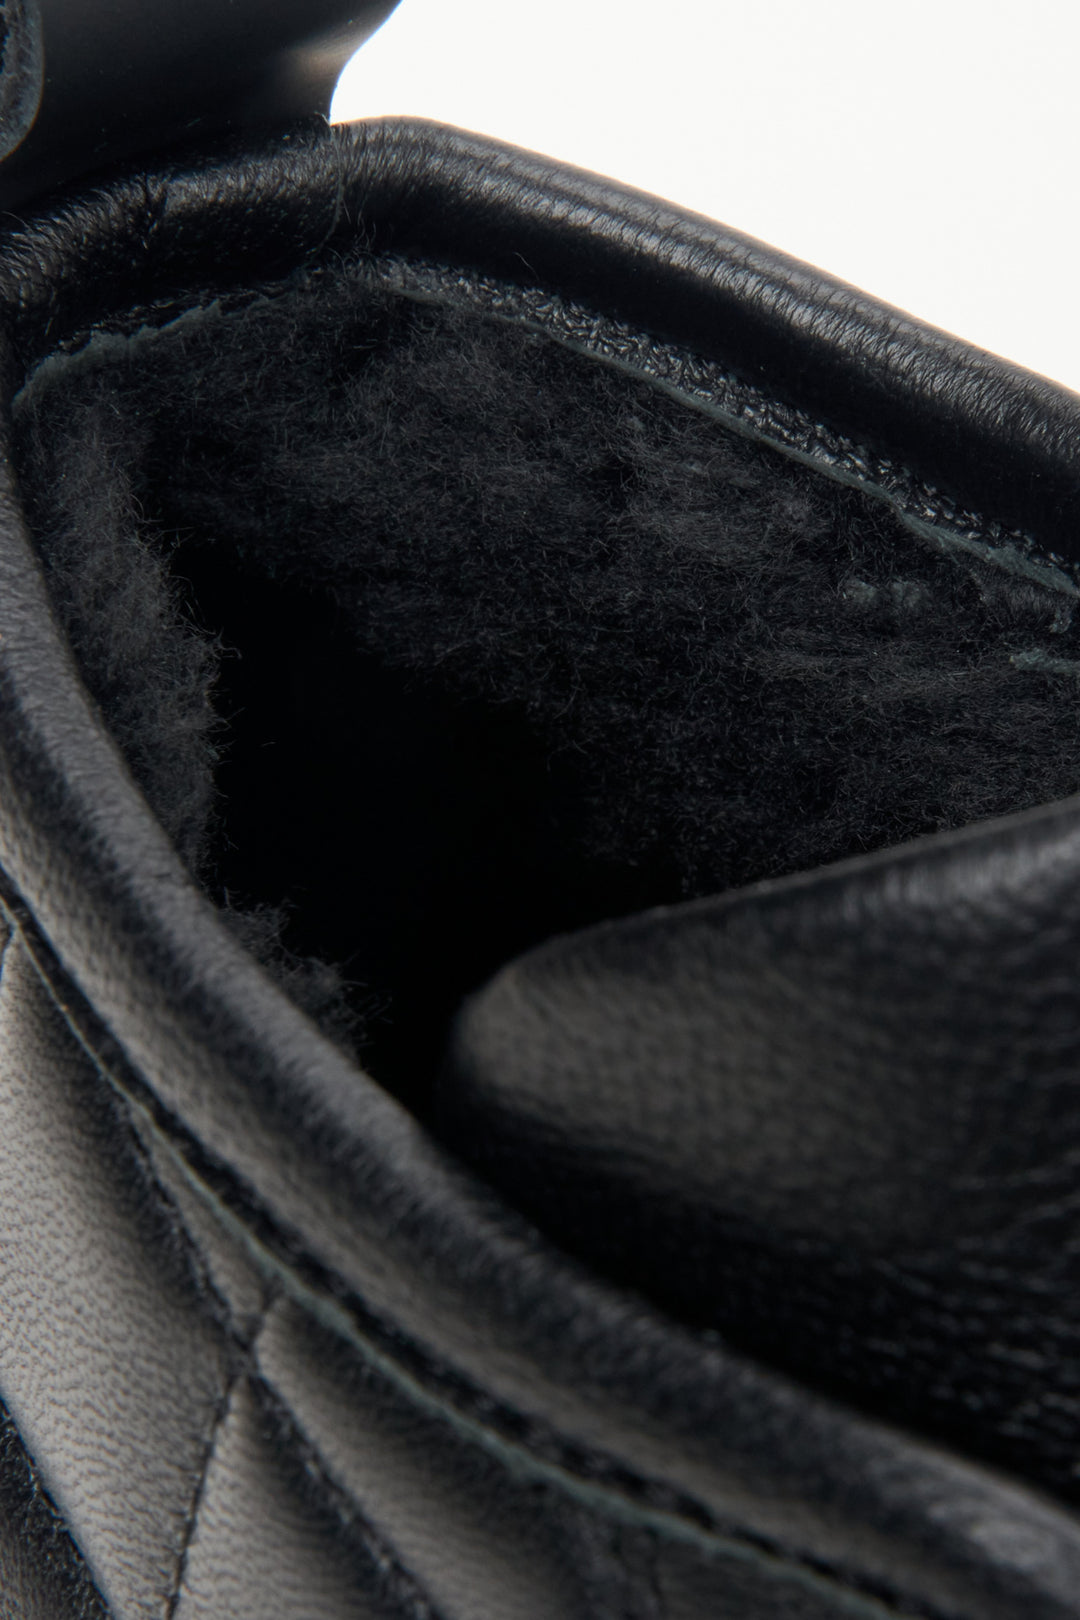 Men's leather black boots with insulation by Estro - close-up of the warm insert.